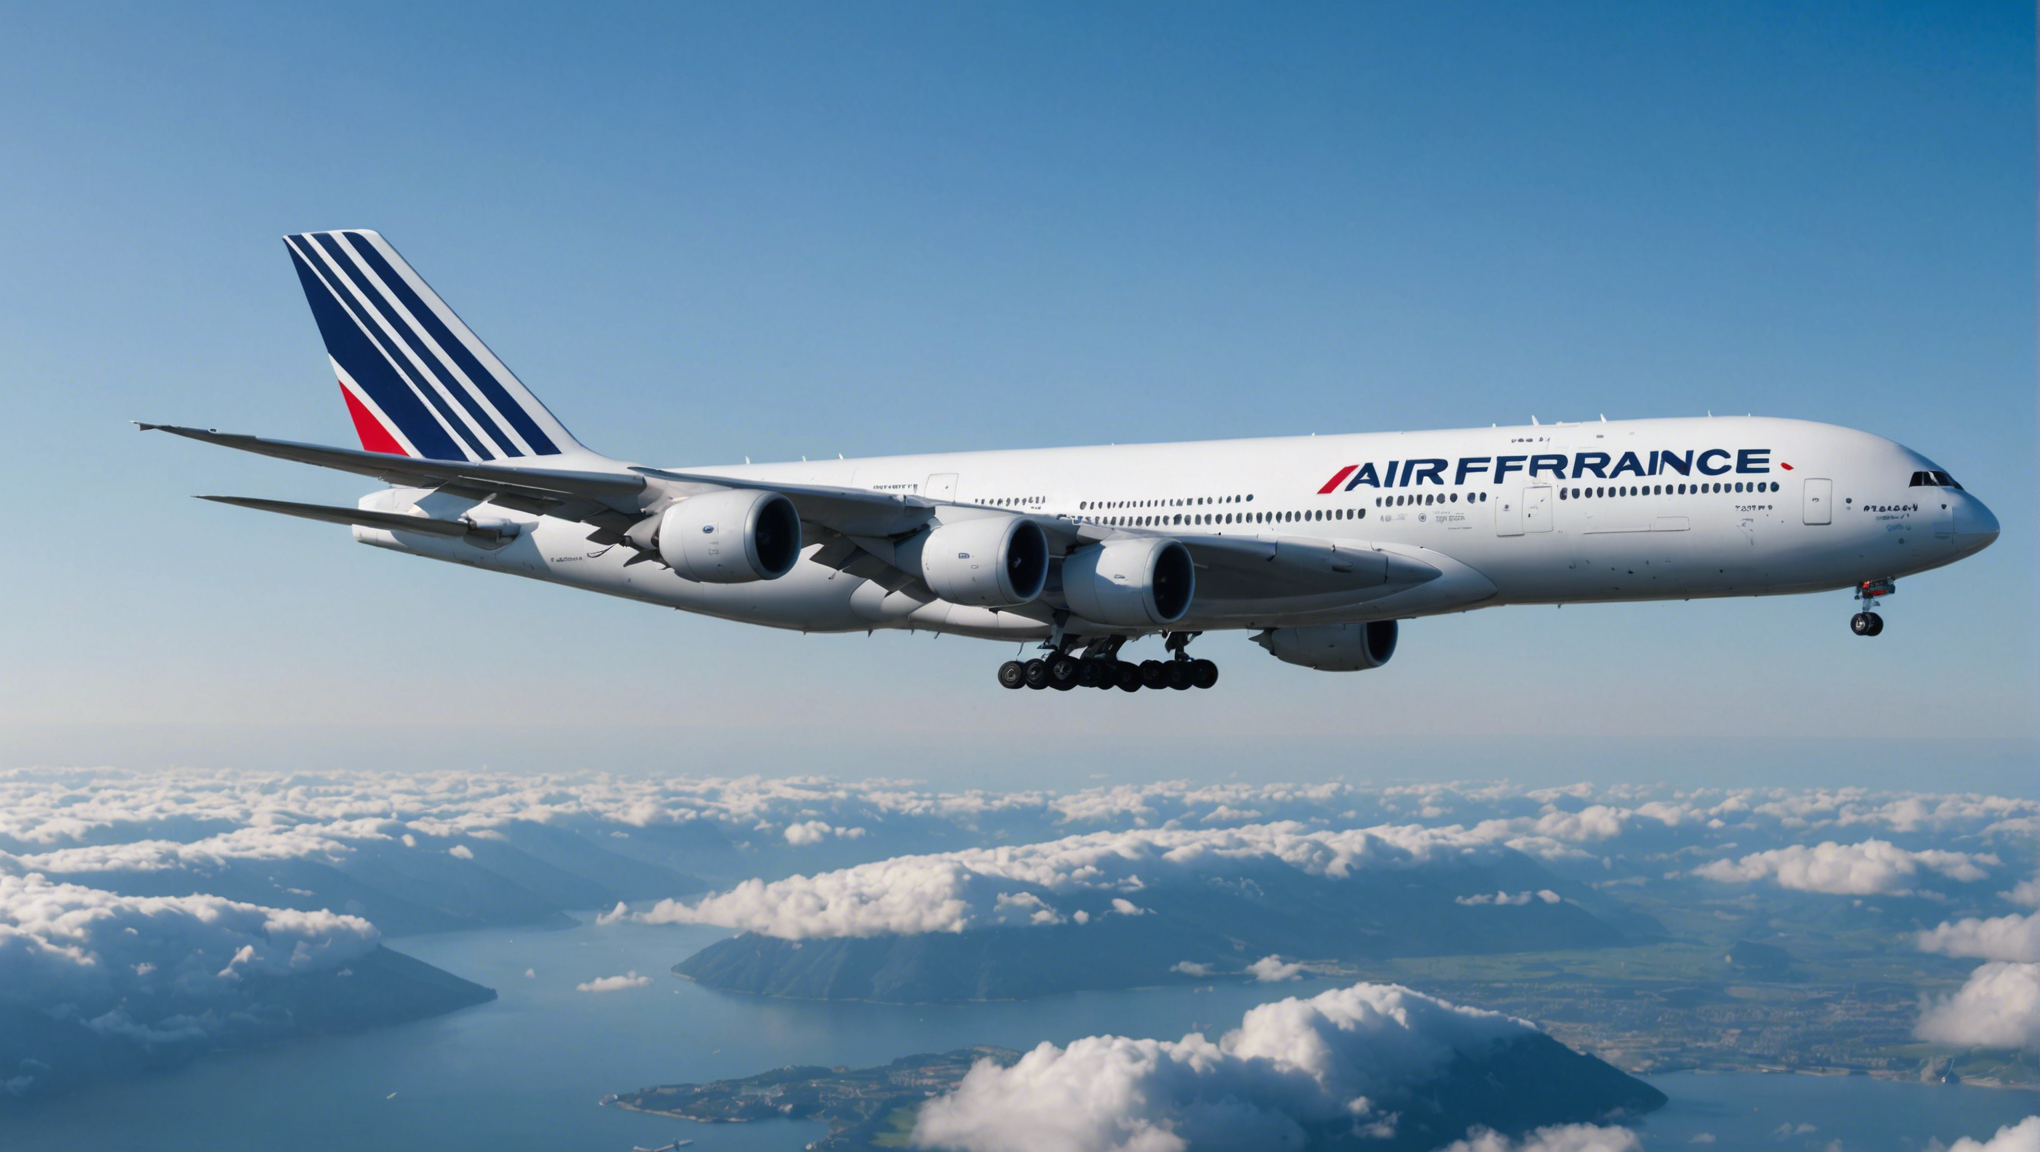 find out how air france integrates artificial intelligence into its day-to-day operations to deliver quality services.